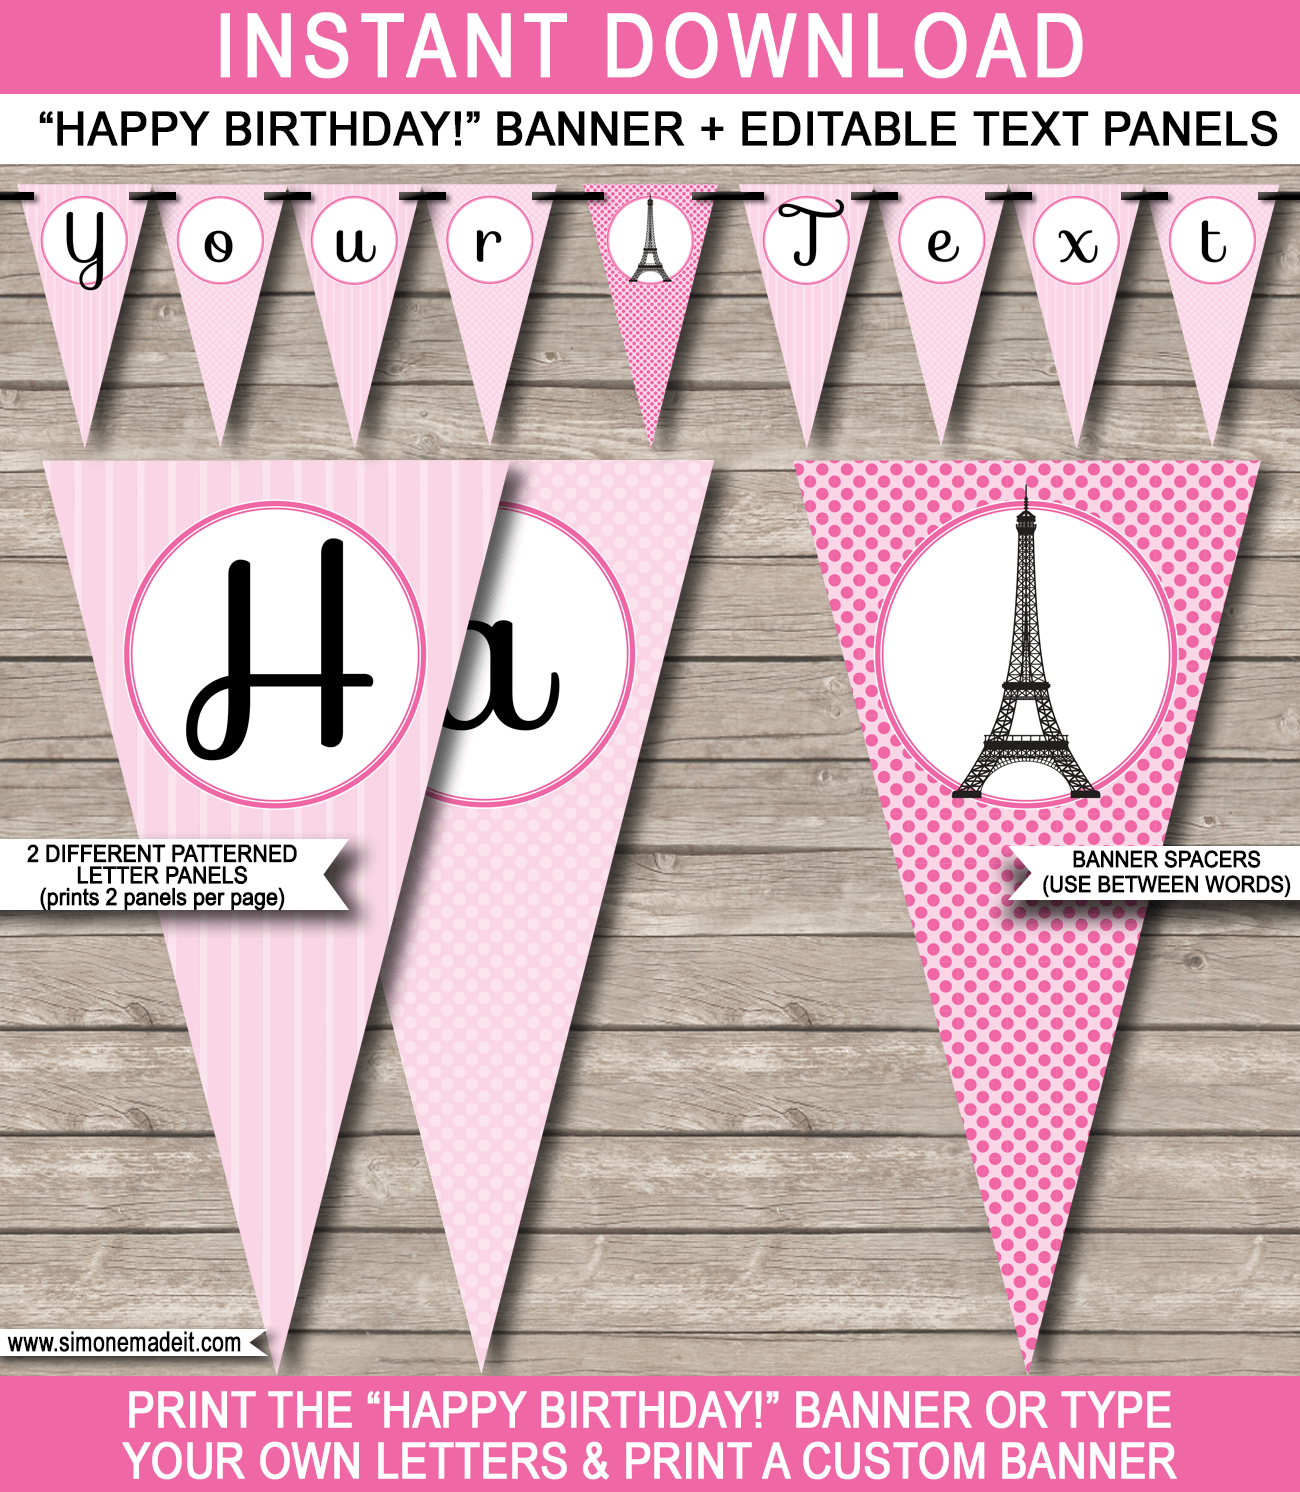 Paris Party Banner Template - Paris Bunting - Happy Birthday Banner - Birthday Party - Editable and Printable DIY Template - INSTANT DOWNLOAD $4.50 via simonemadeit.com